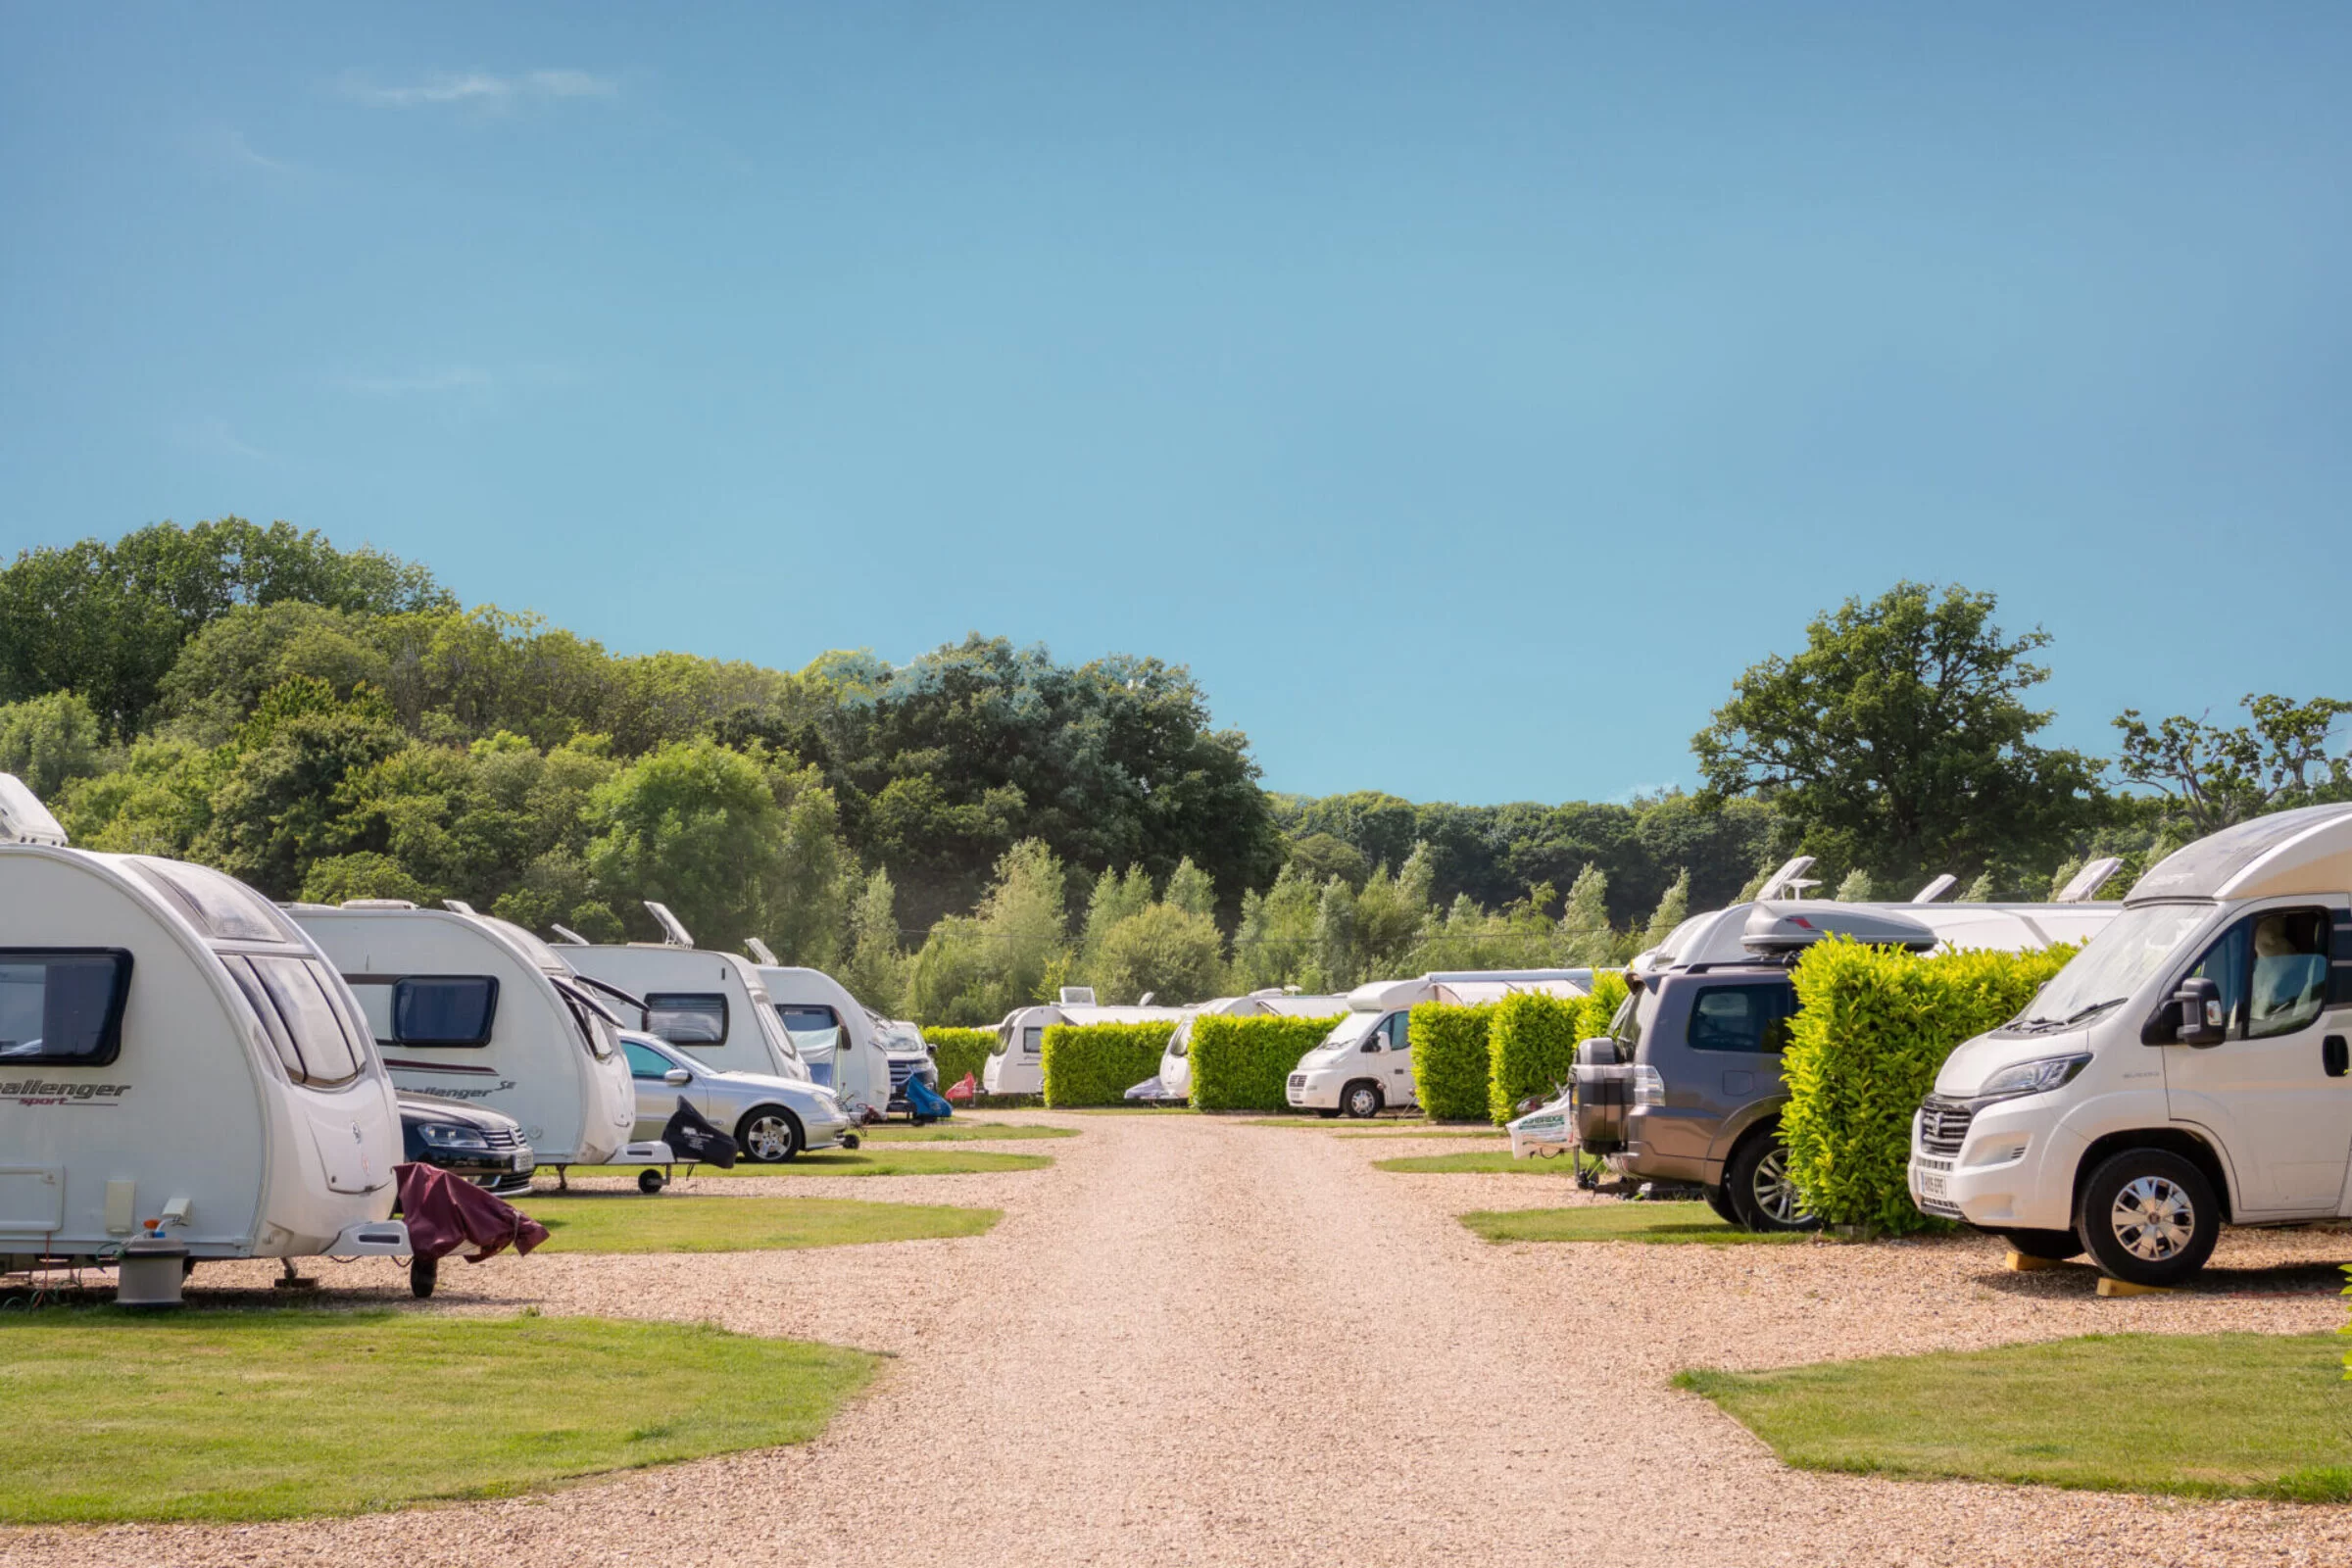 Touring-pitches-at-south-lytchett-manor-scaled-e1664273405526-2400x1600